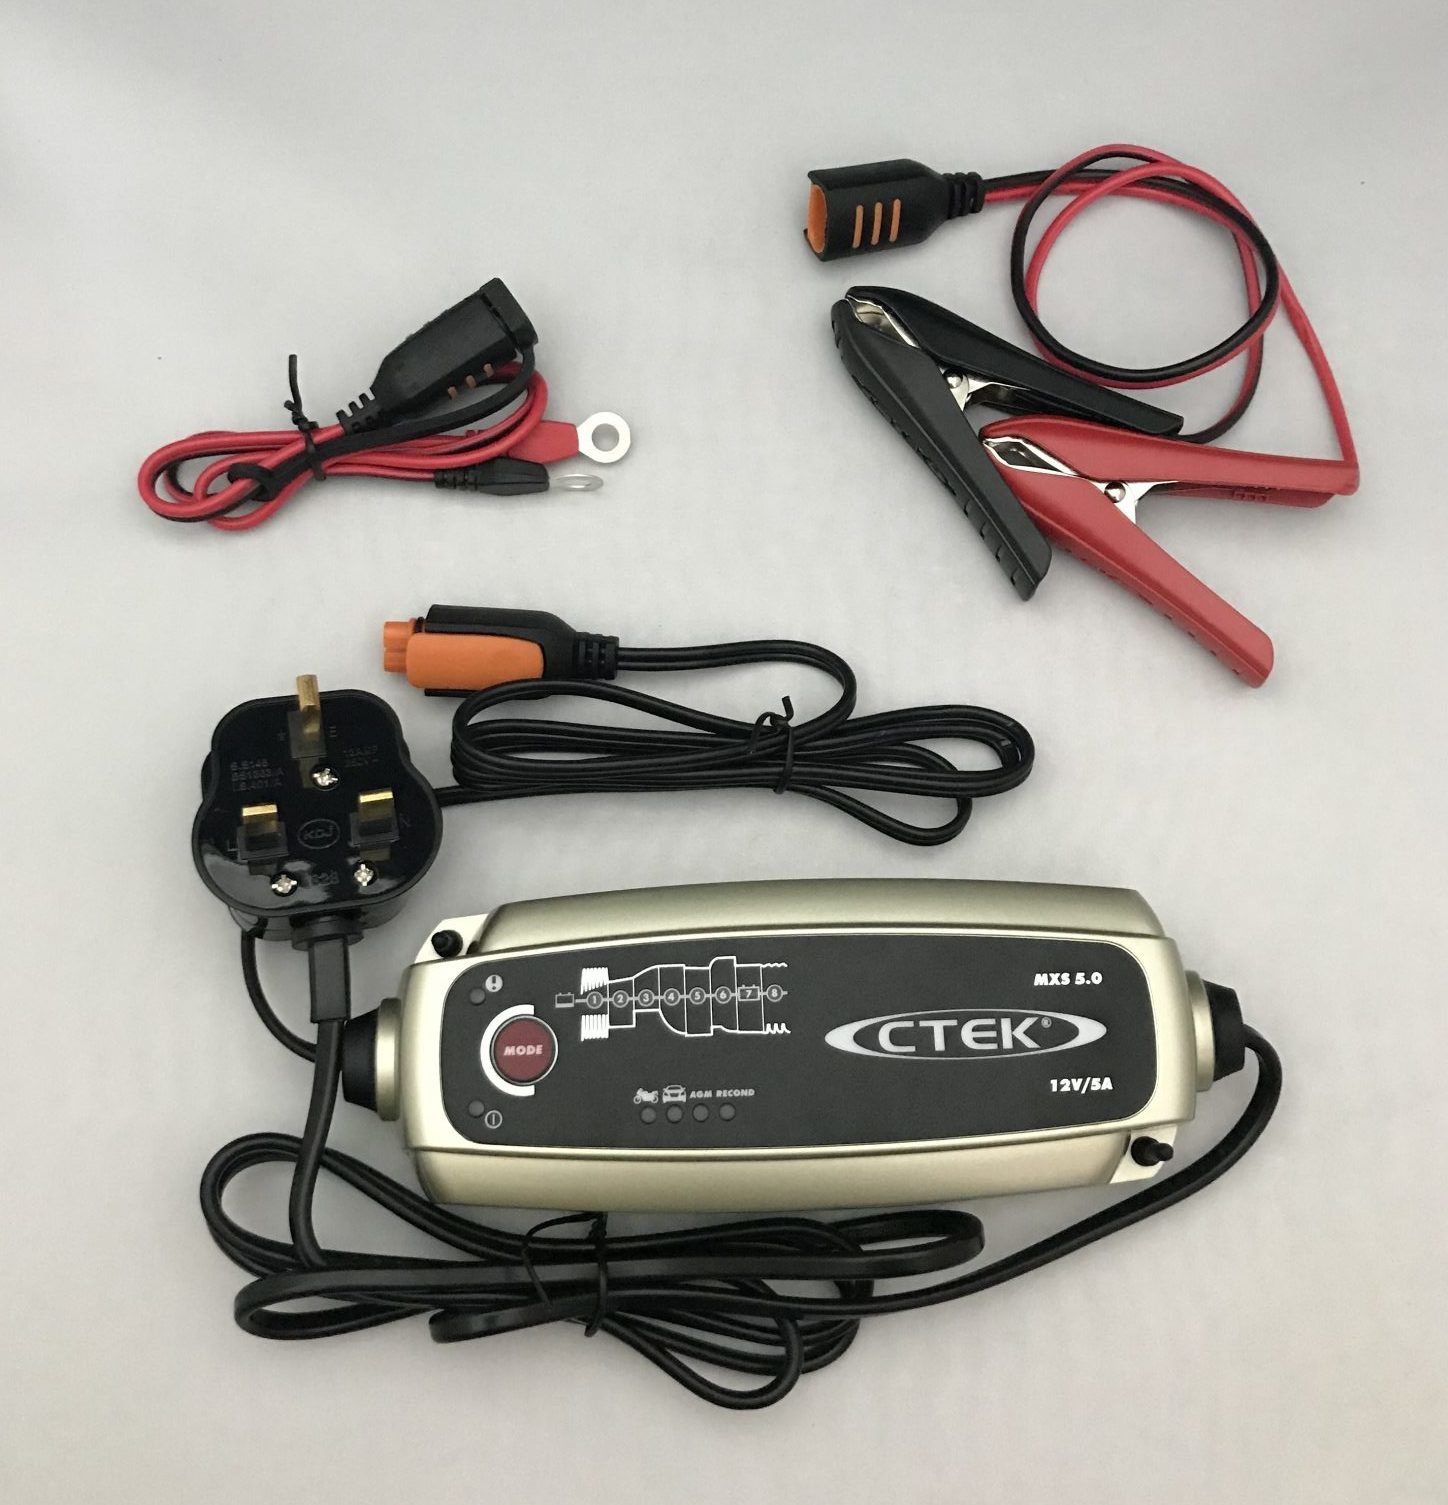 CTEK MXS 5.0 BATTERY CHARGER AND MAINTAINER - Porsche 968, 944